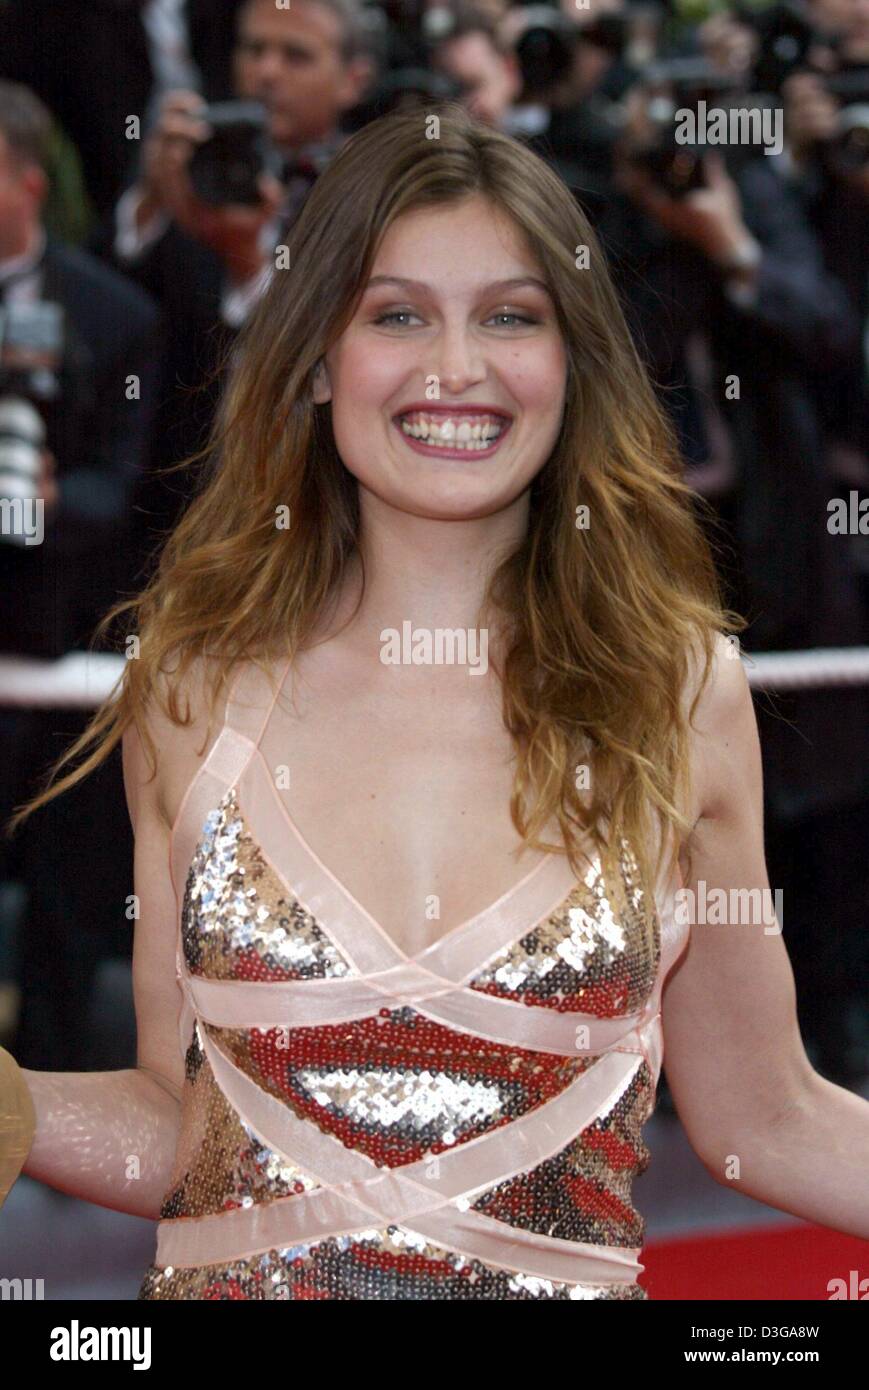 (dpa) - Model and actress Laetitia Casta arrives for the opening of the 57th Film Festival in Cannes, France, 12 May 2004. The Golden Palm awards will be awarded on 22 May. Stock Photo